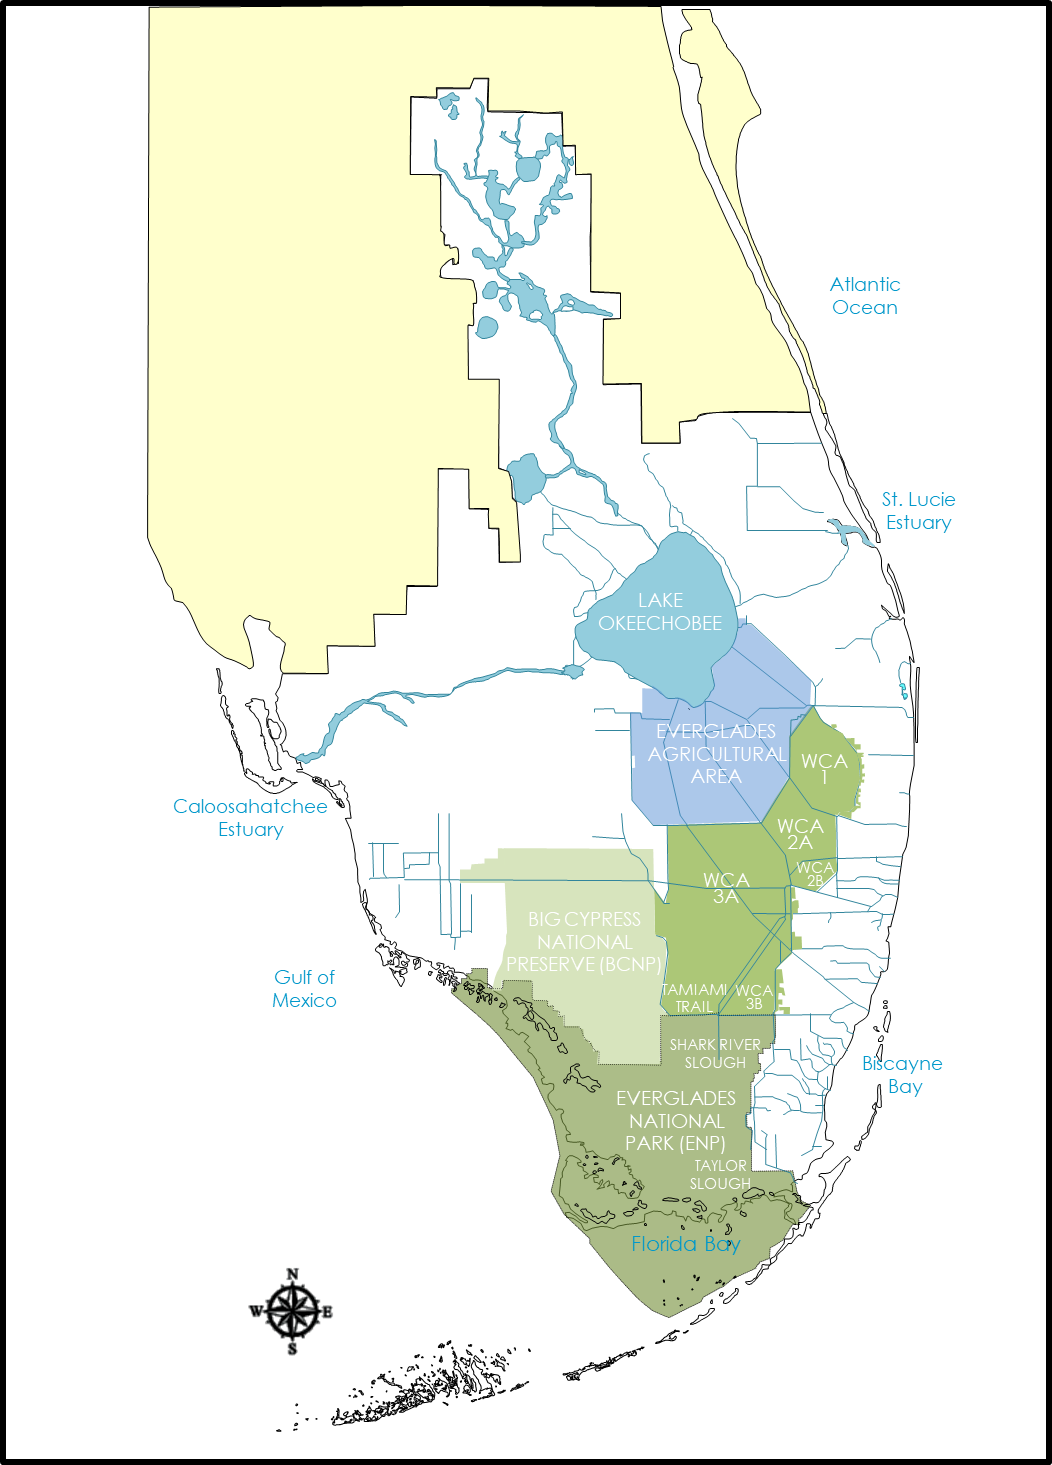 South Florida Features Map